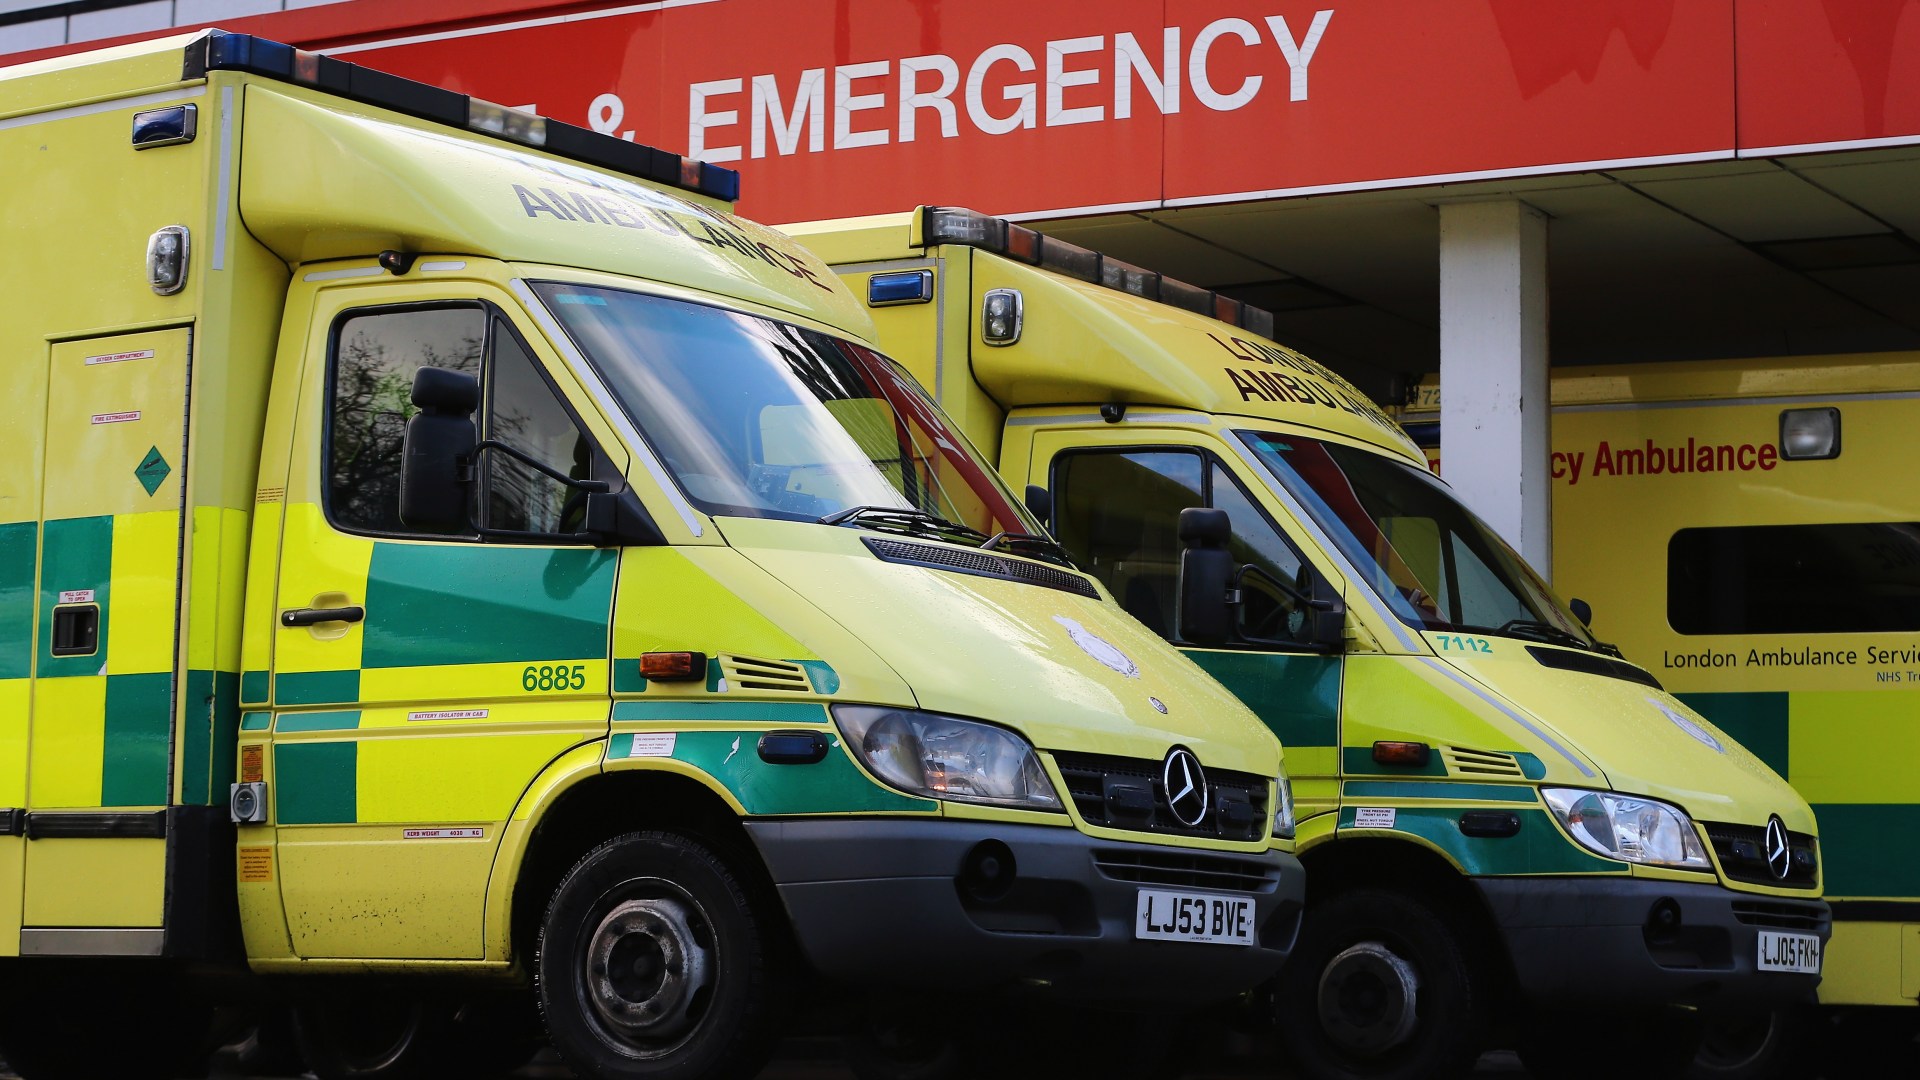 NHS cyber attack: Major UK hospitals forced to cancel surgeries and blood transfusions as ‘critical incident’ declared [Video]